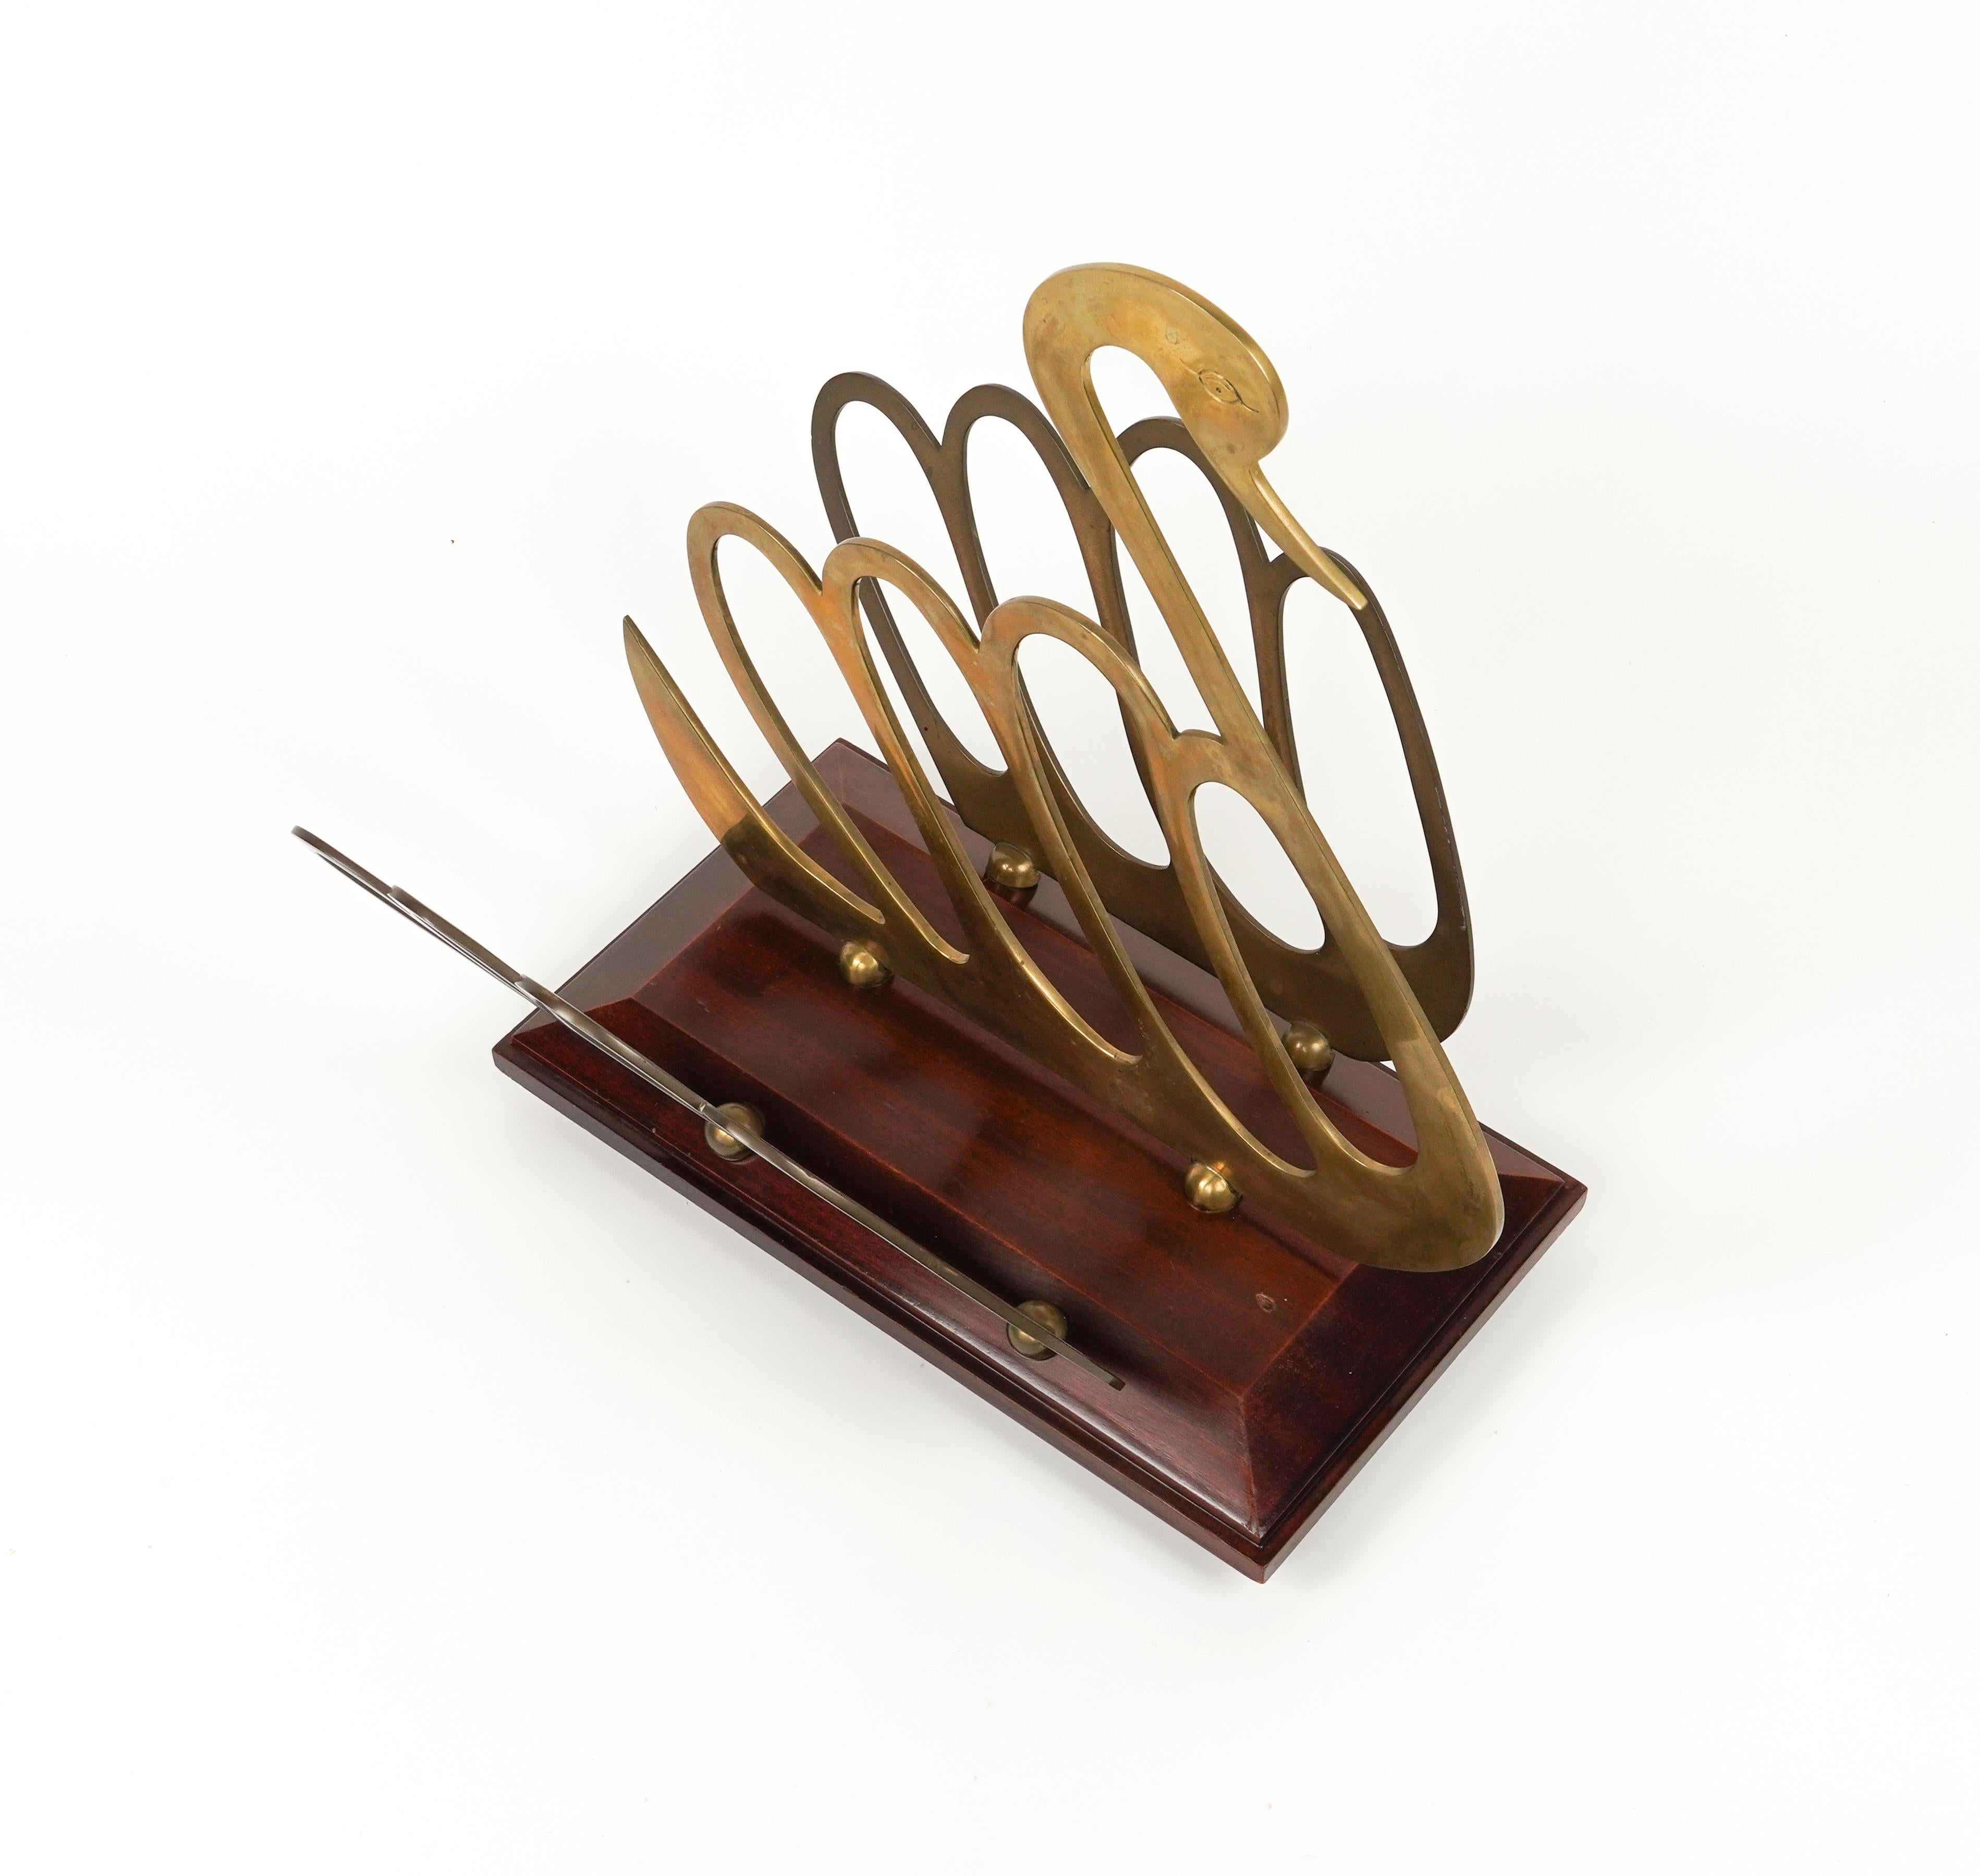 Metal Swan Shaped Magazine Rack in Wood and Brass Maison Jansen Style, Italy 1970s For Sale